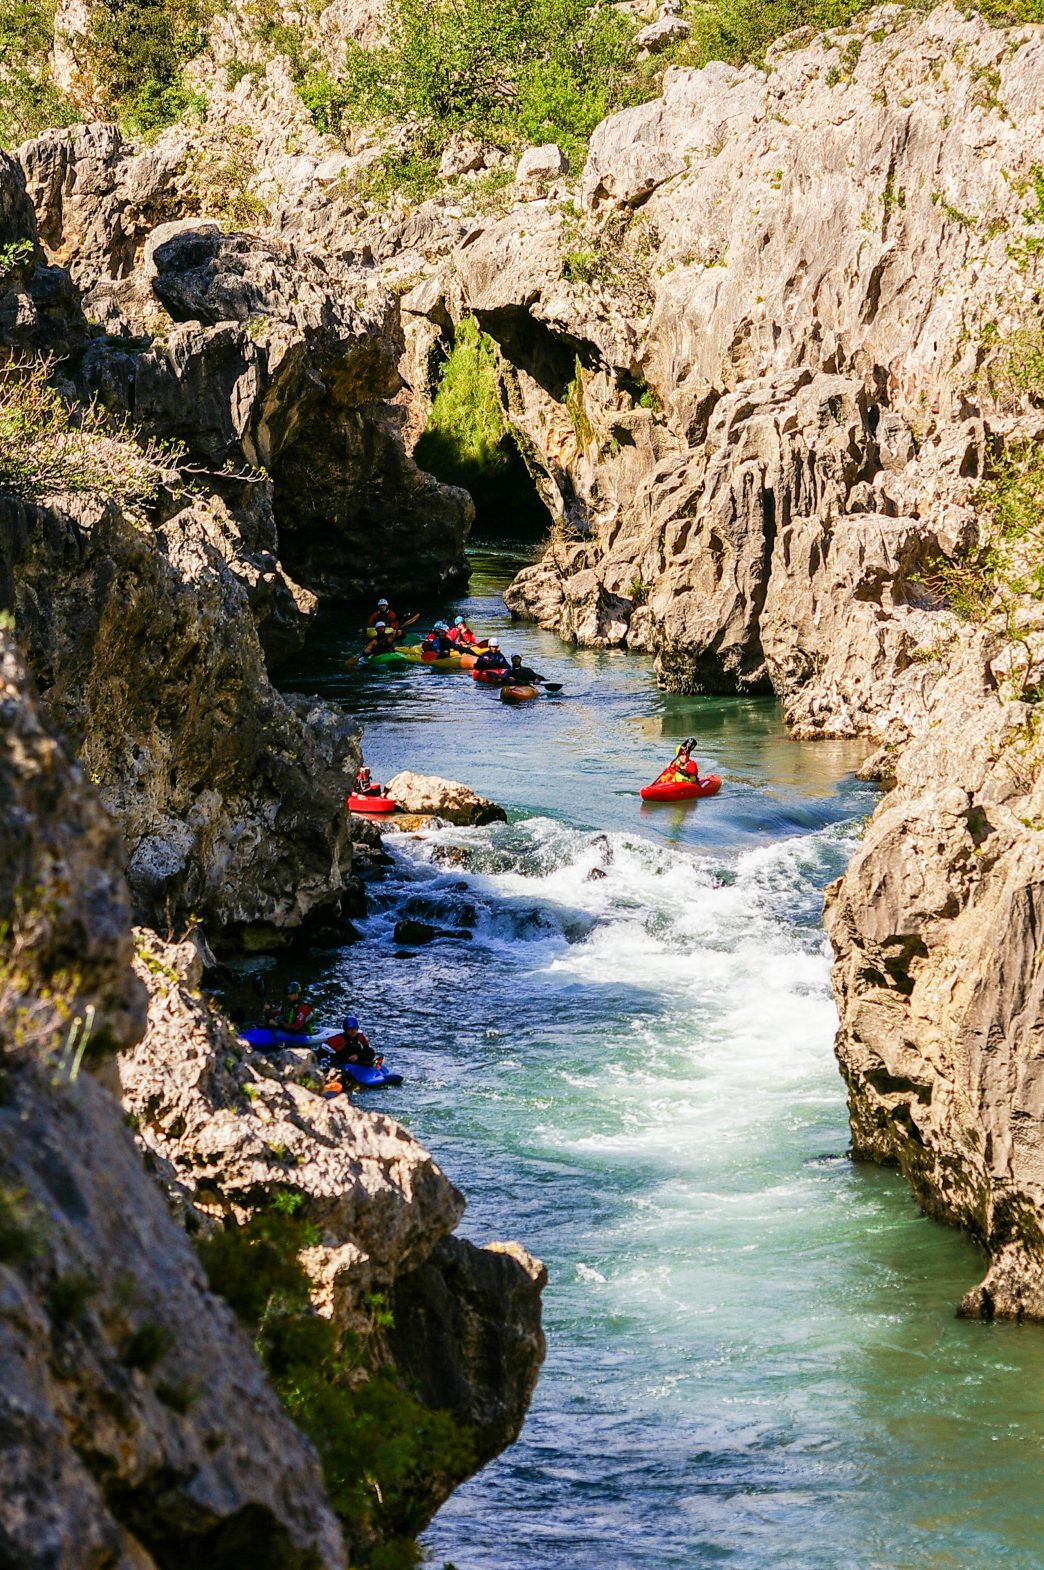 Kayakers go down a chasm in the Vallée de l'Hérault; kayaking in France